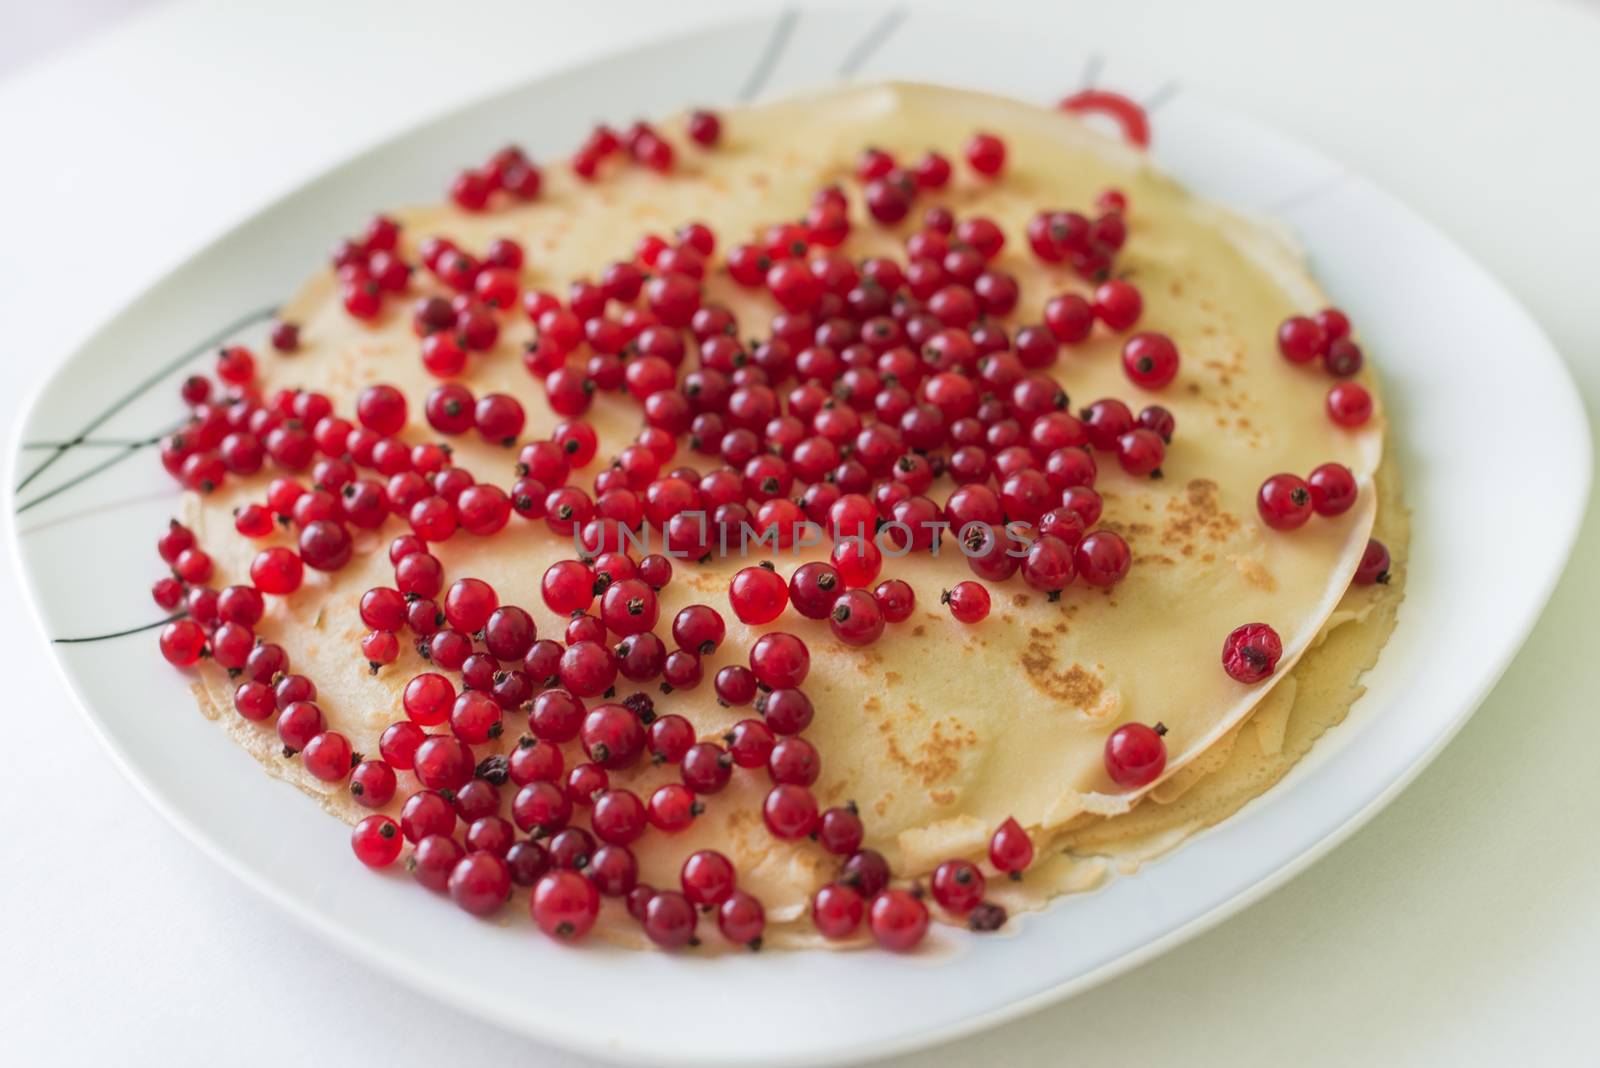 Pancakes with red currant berries by okskukuruza